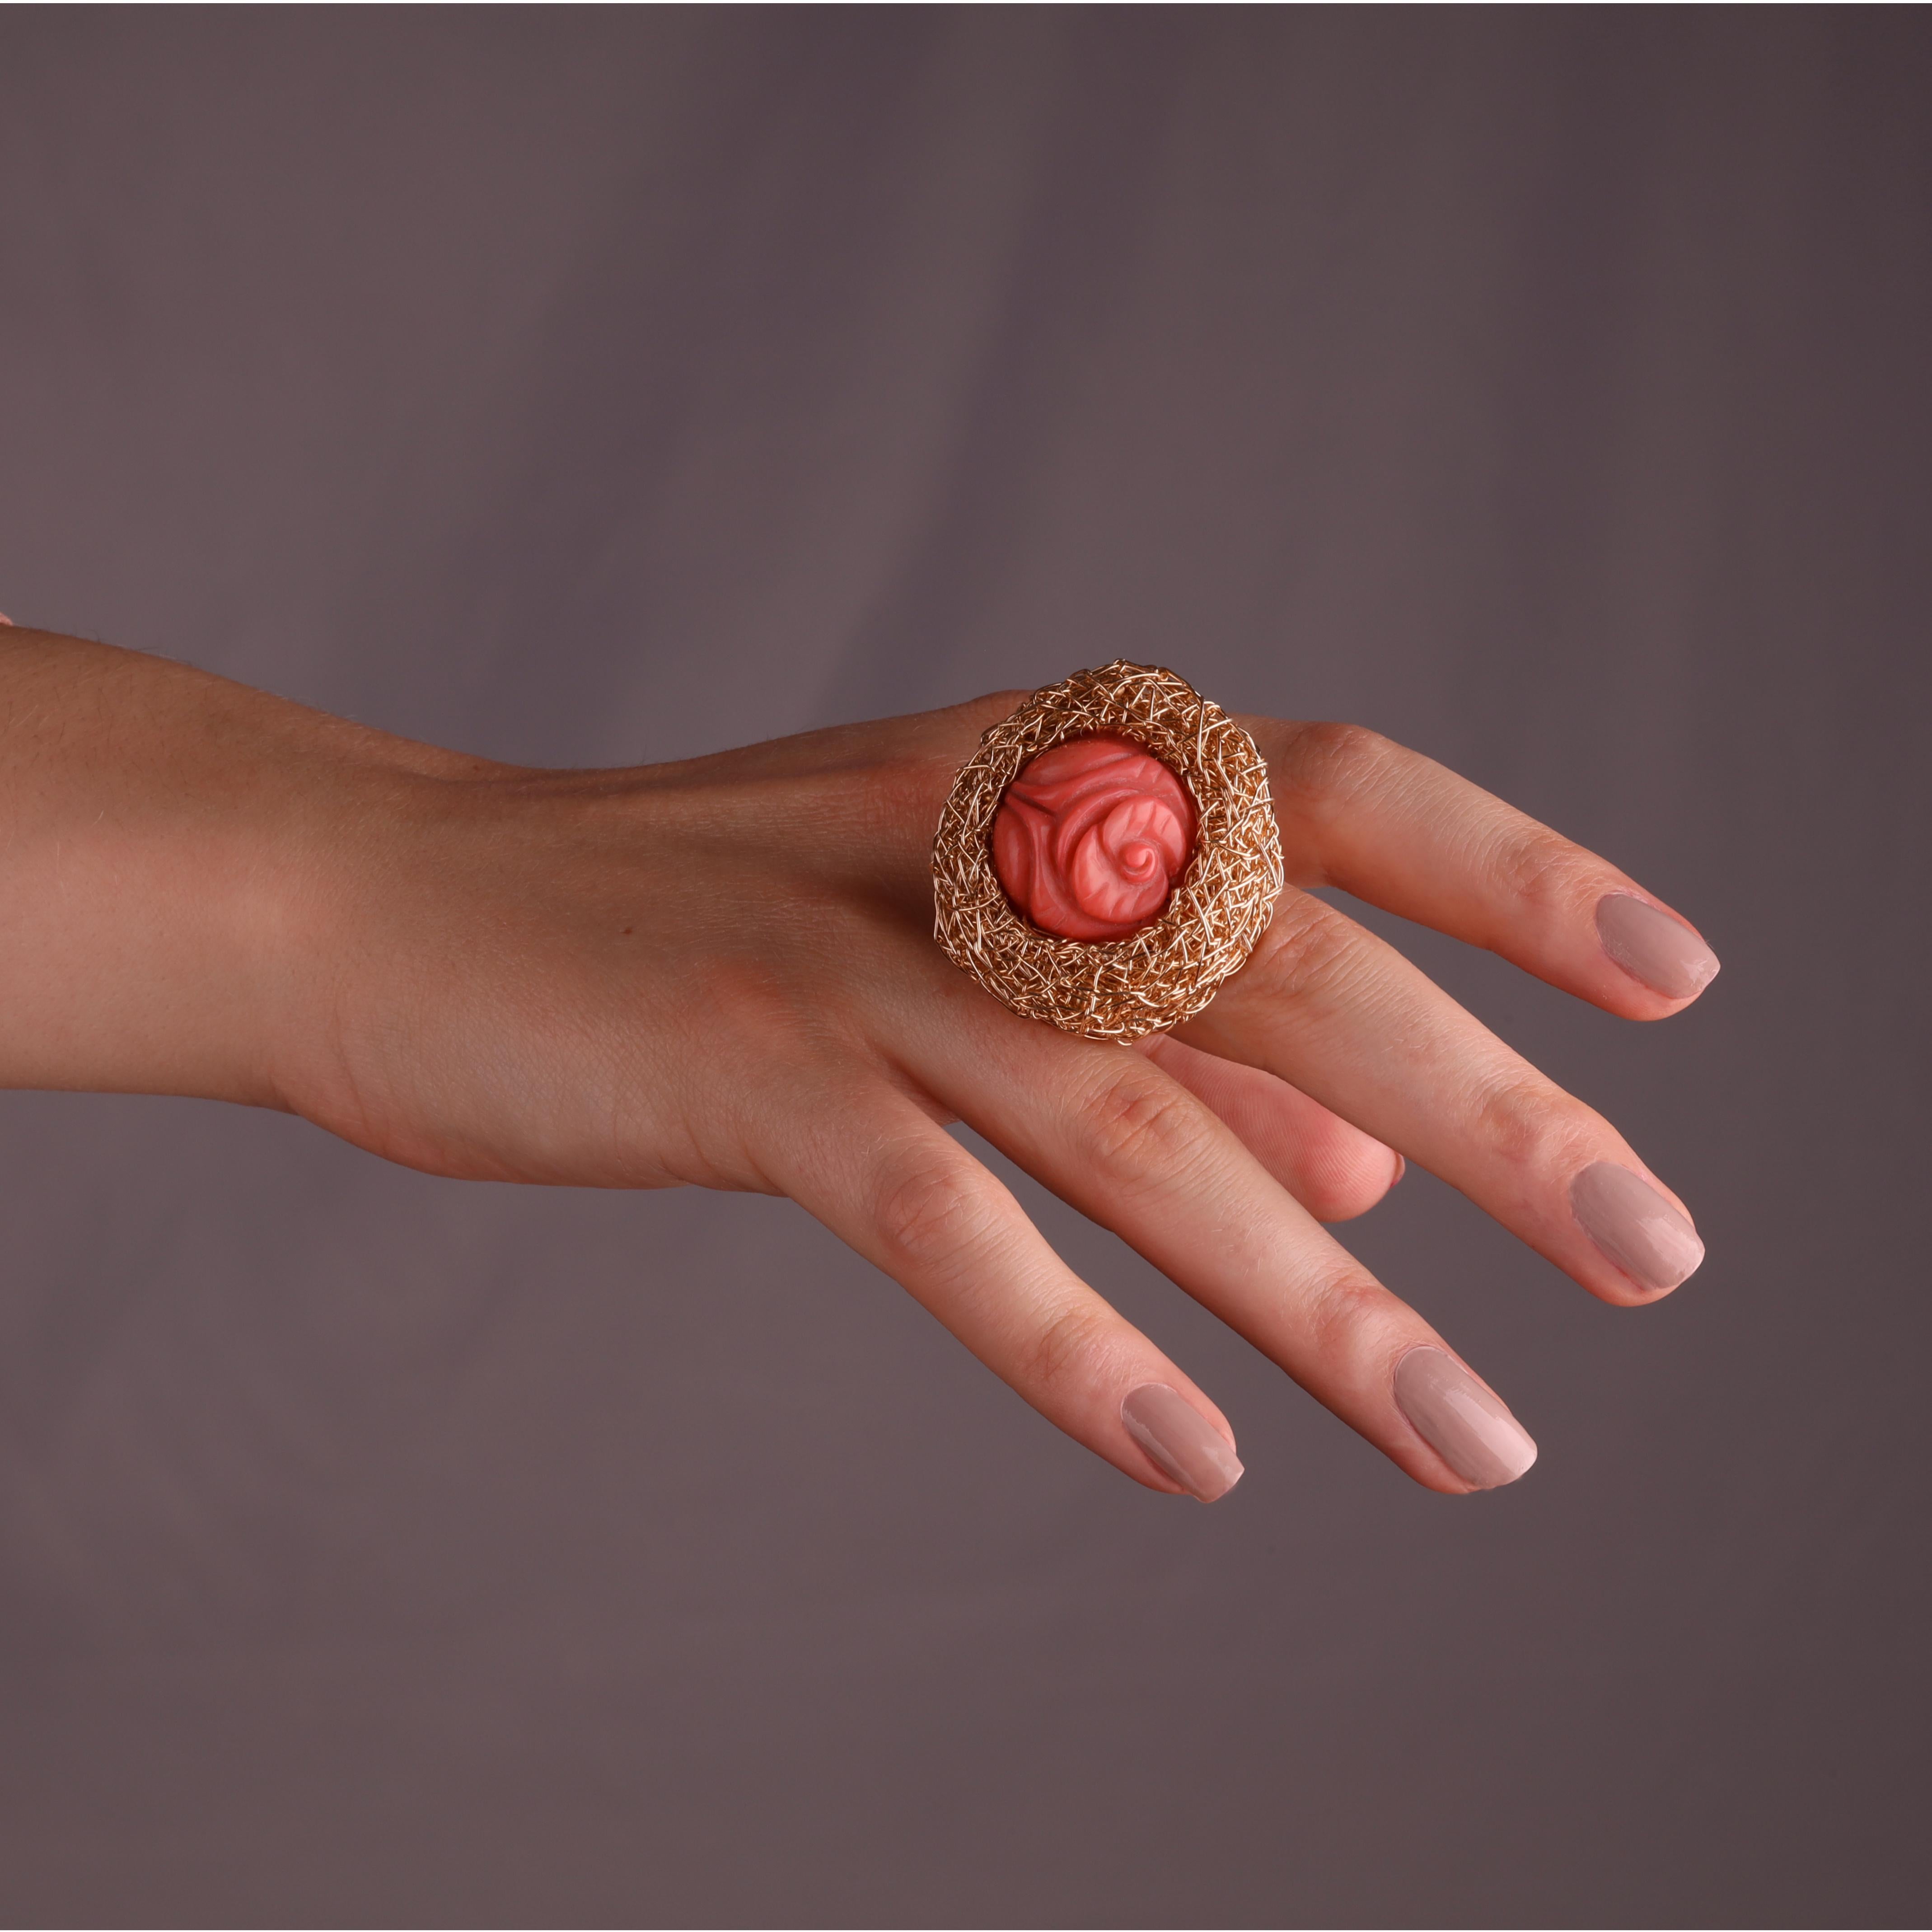 ‘Rosegarden’.... is such a beauty, that comes with a story. A wonderful Cocktail ring, set with a vintage Mediterranean carved Coral. Sheila loves coral but only used vintage pieces as she is a true trooper in protecting our environment and